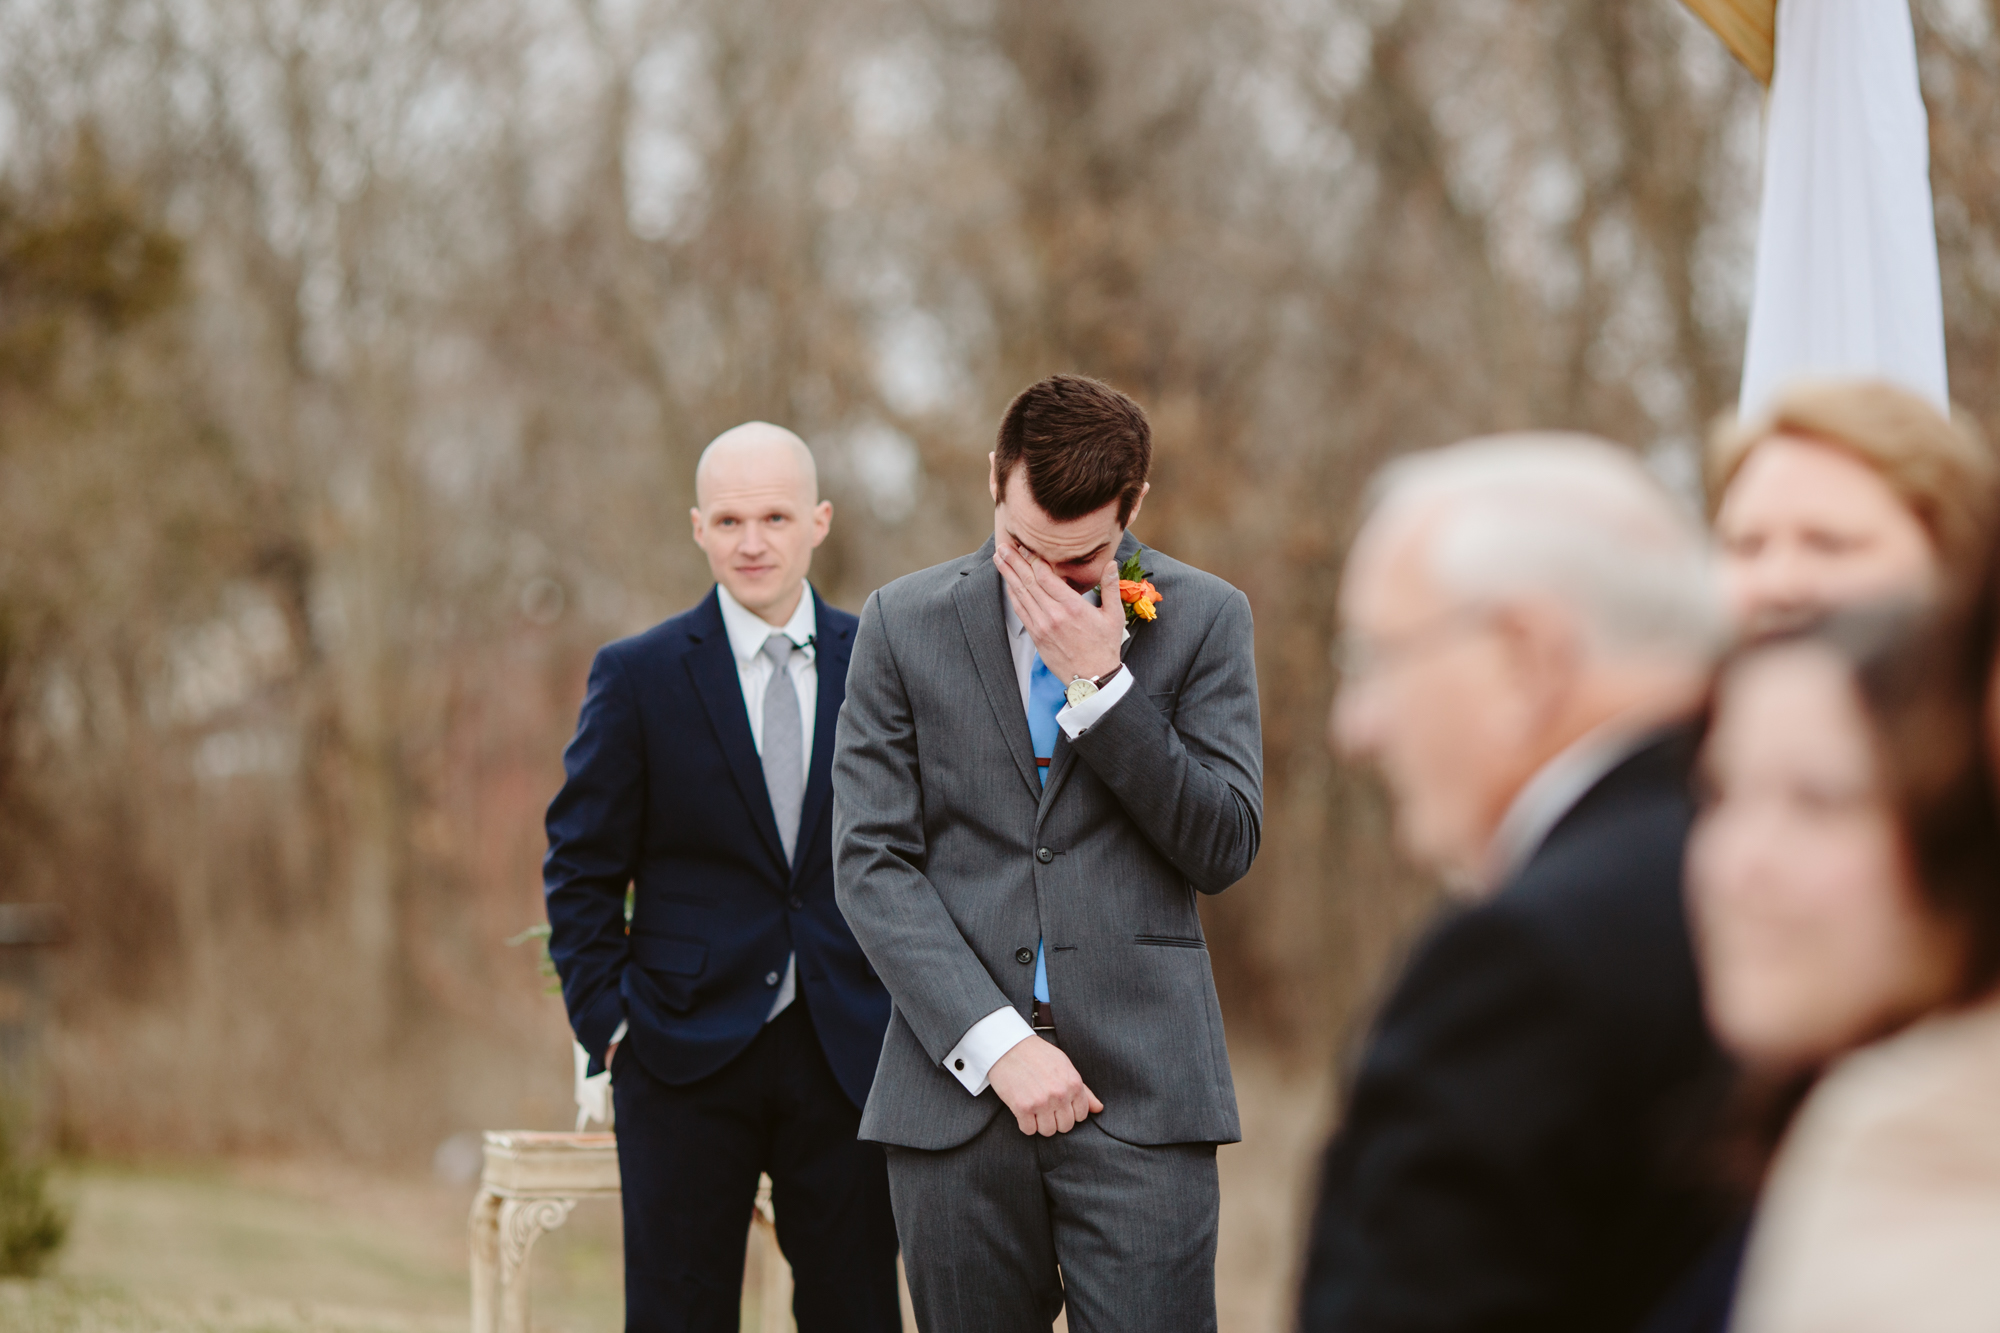 Groom seeing his bride for the first time down the aisle outside at the stone house of st charles wedding venue